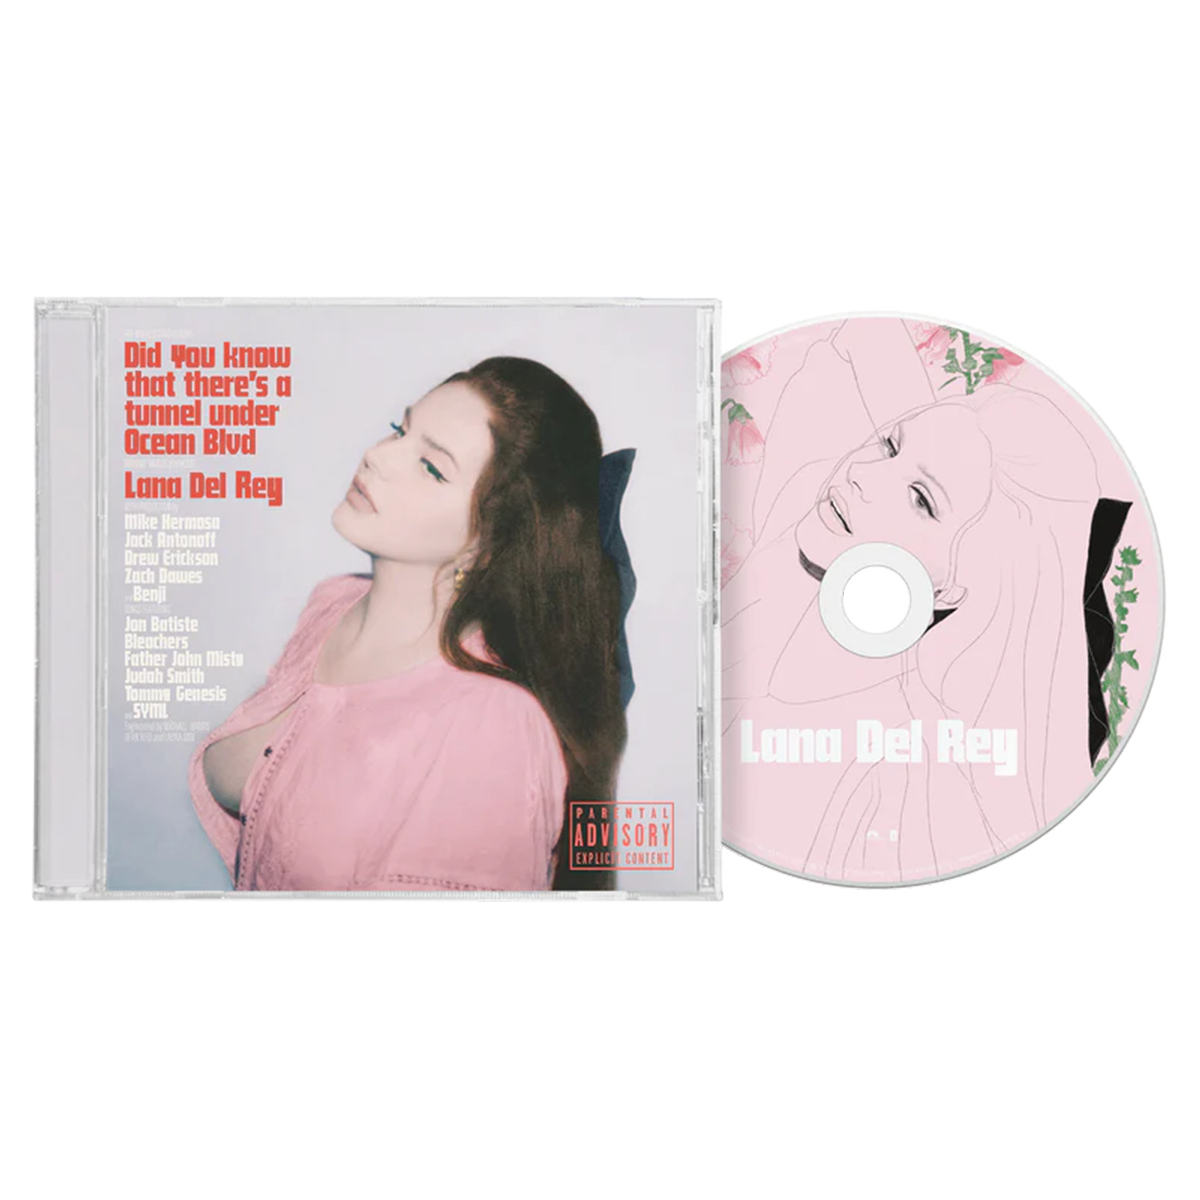 Lana Del Rey - Did You Know That There's a Tunnel Under Ocean Blvd: ALT Cover CD #3